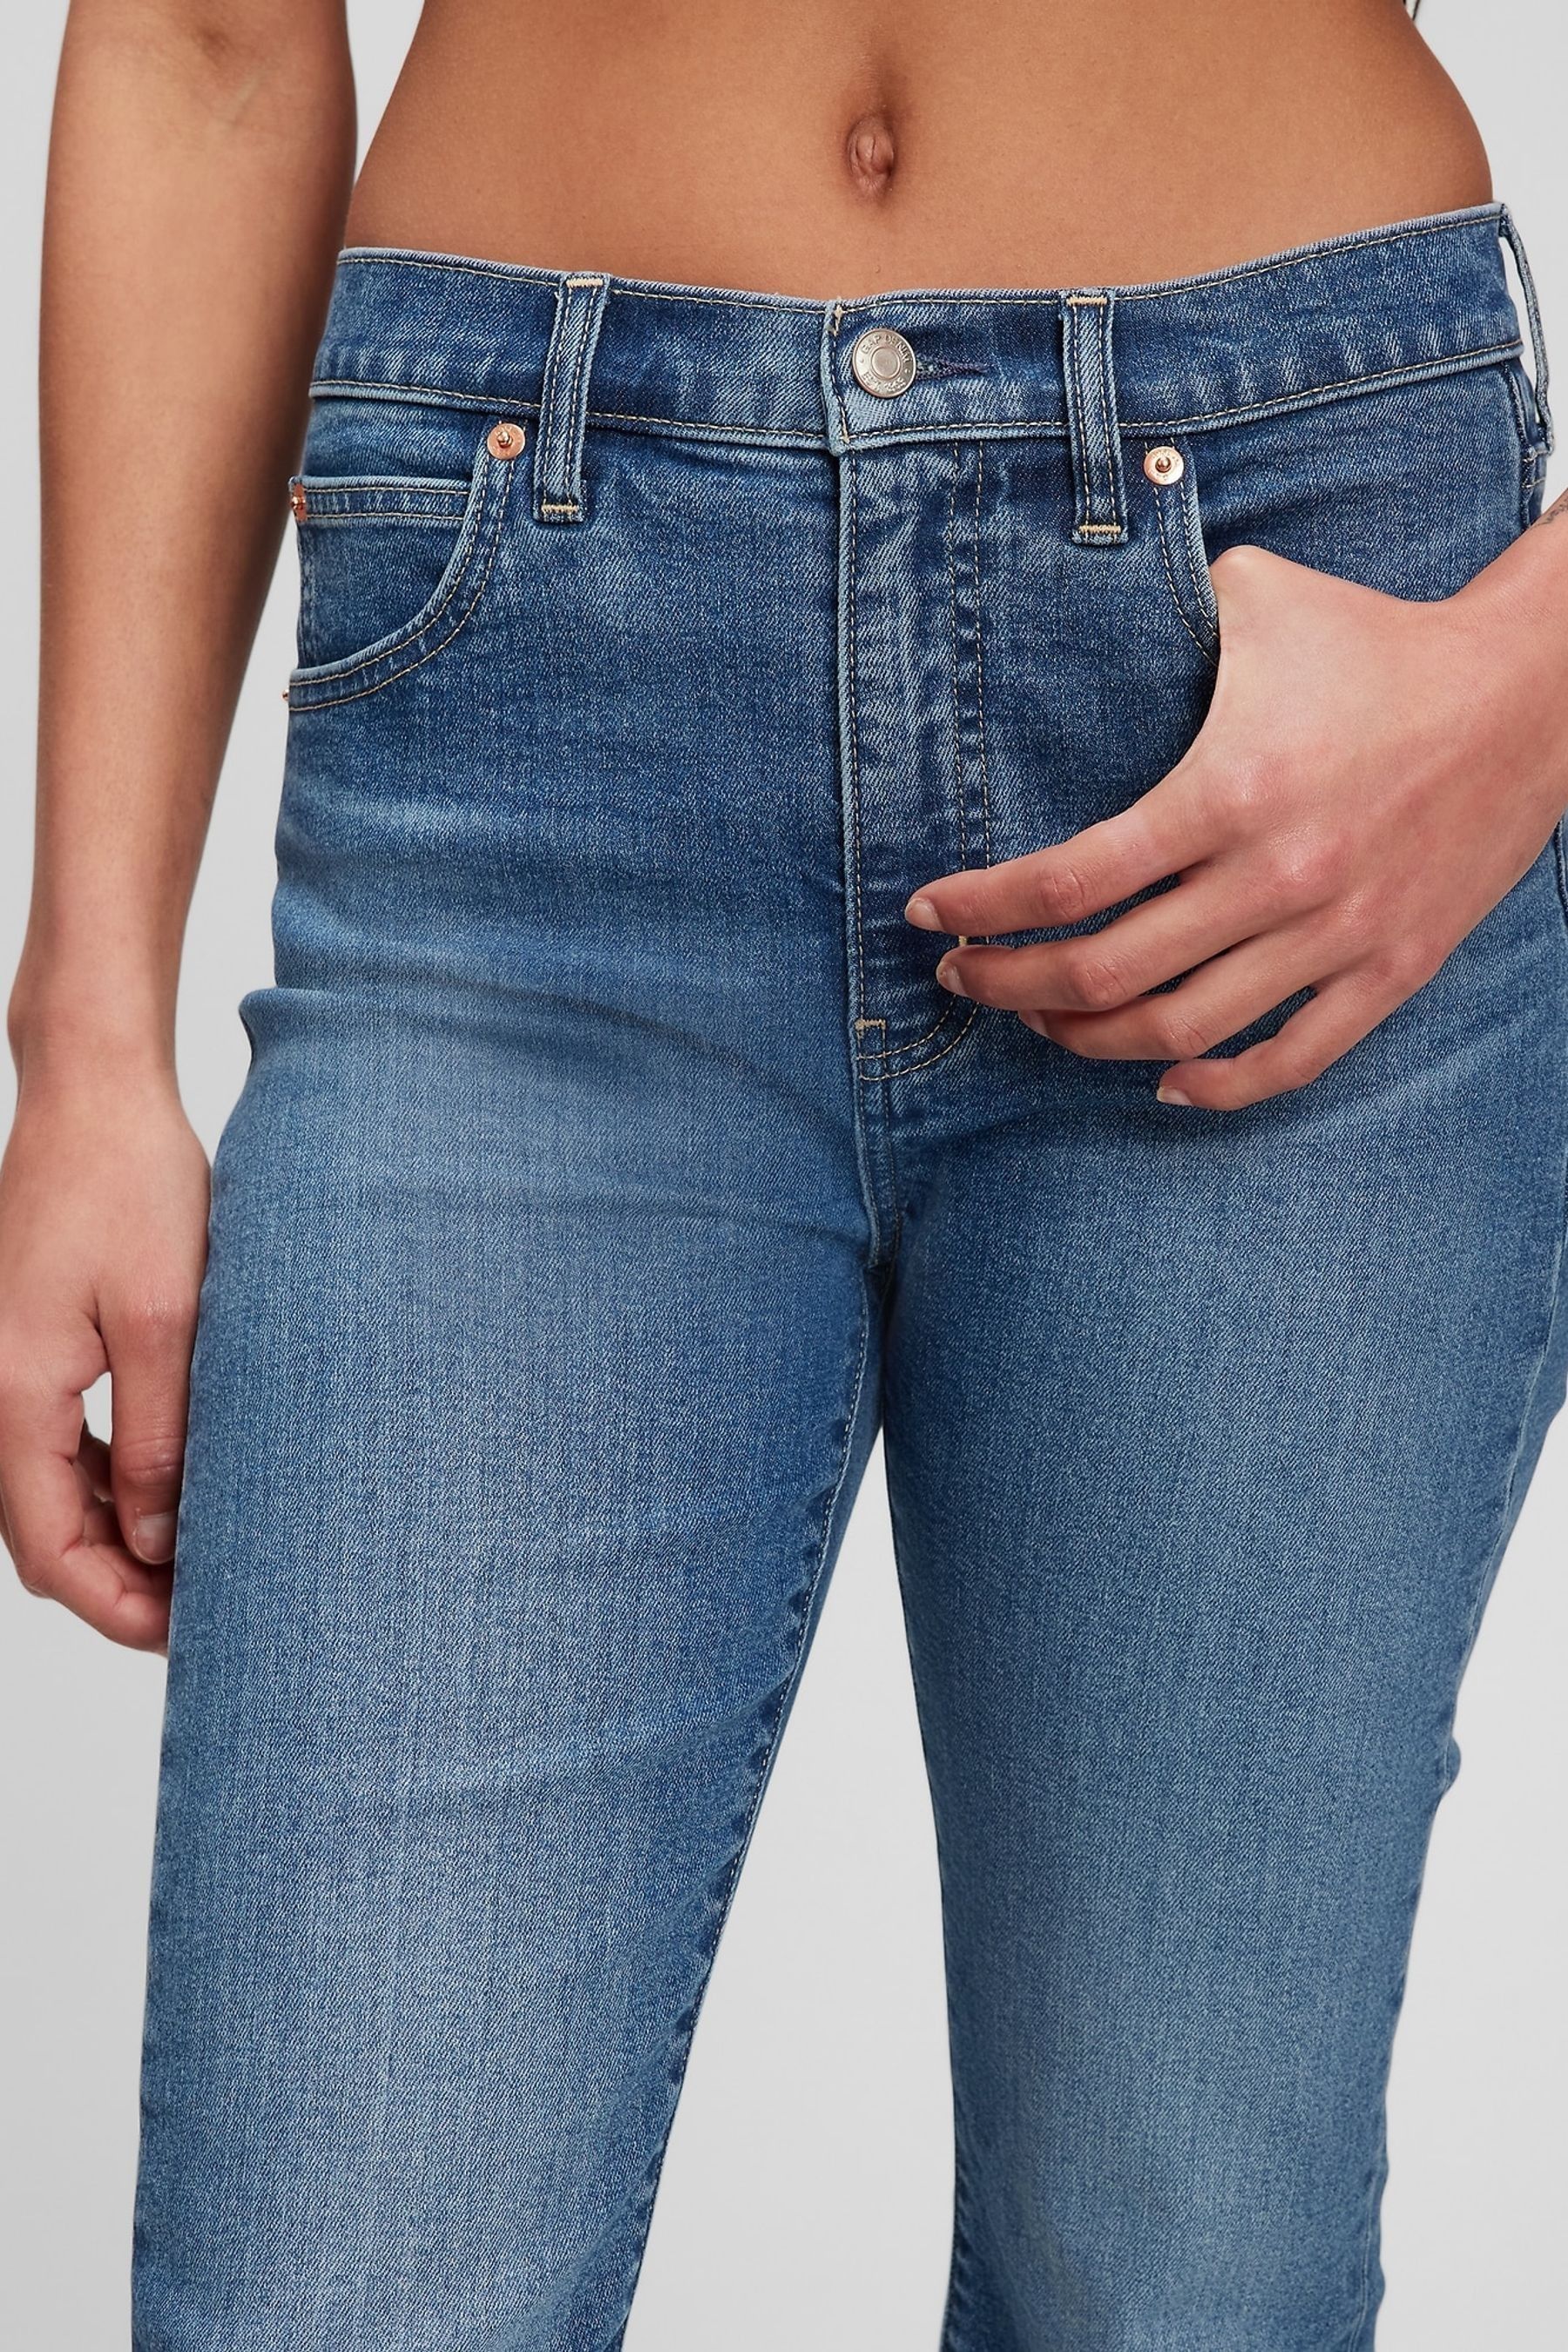 Buy Mid Wash Blue High Waisted Kick Fit Jeans from the Gap online shop